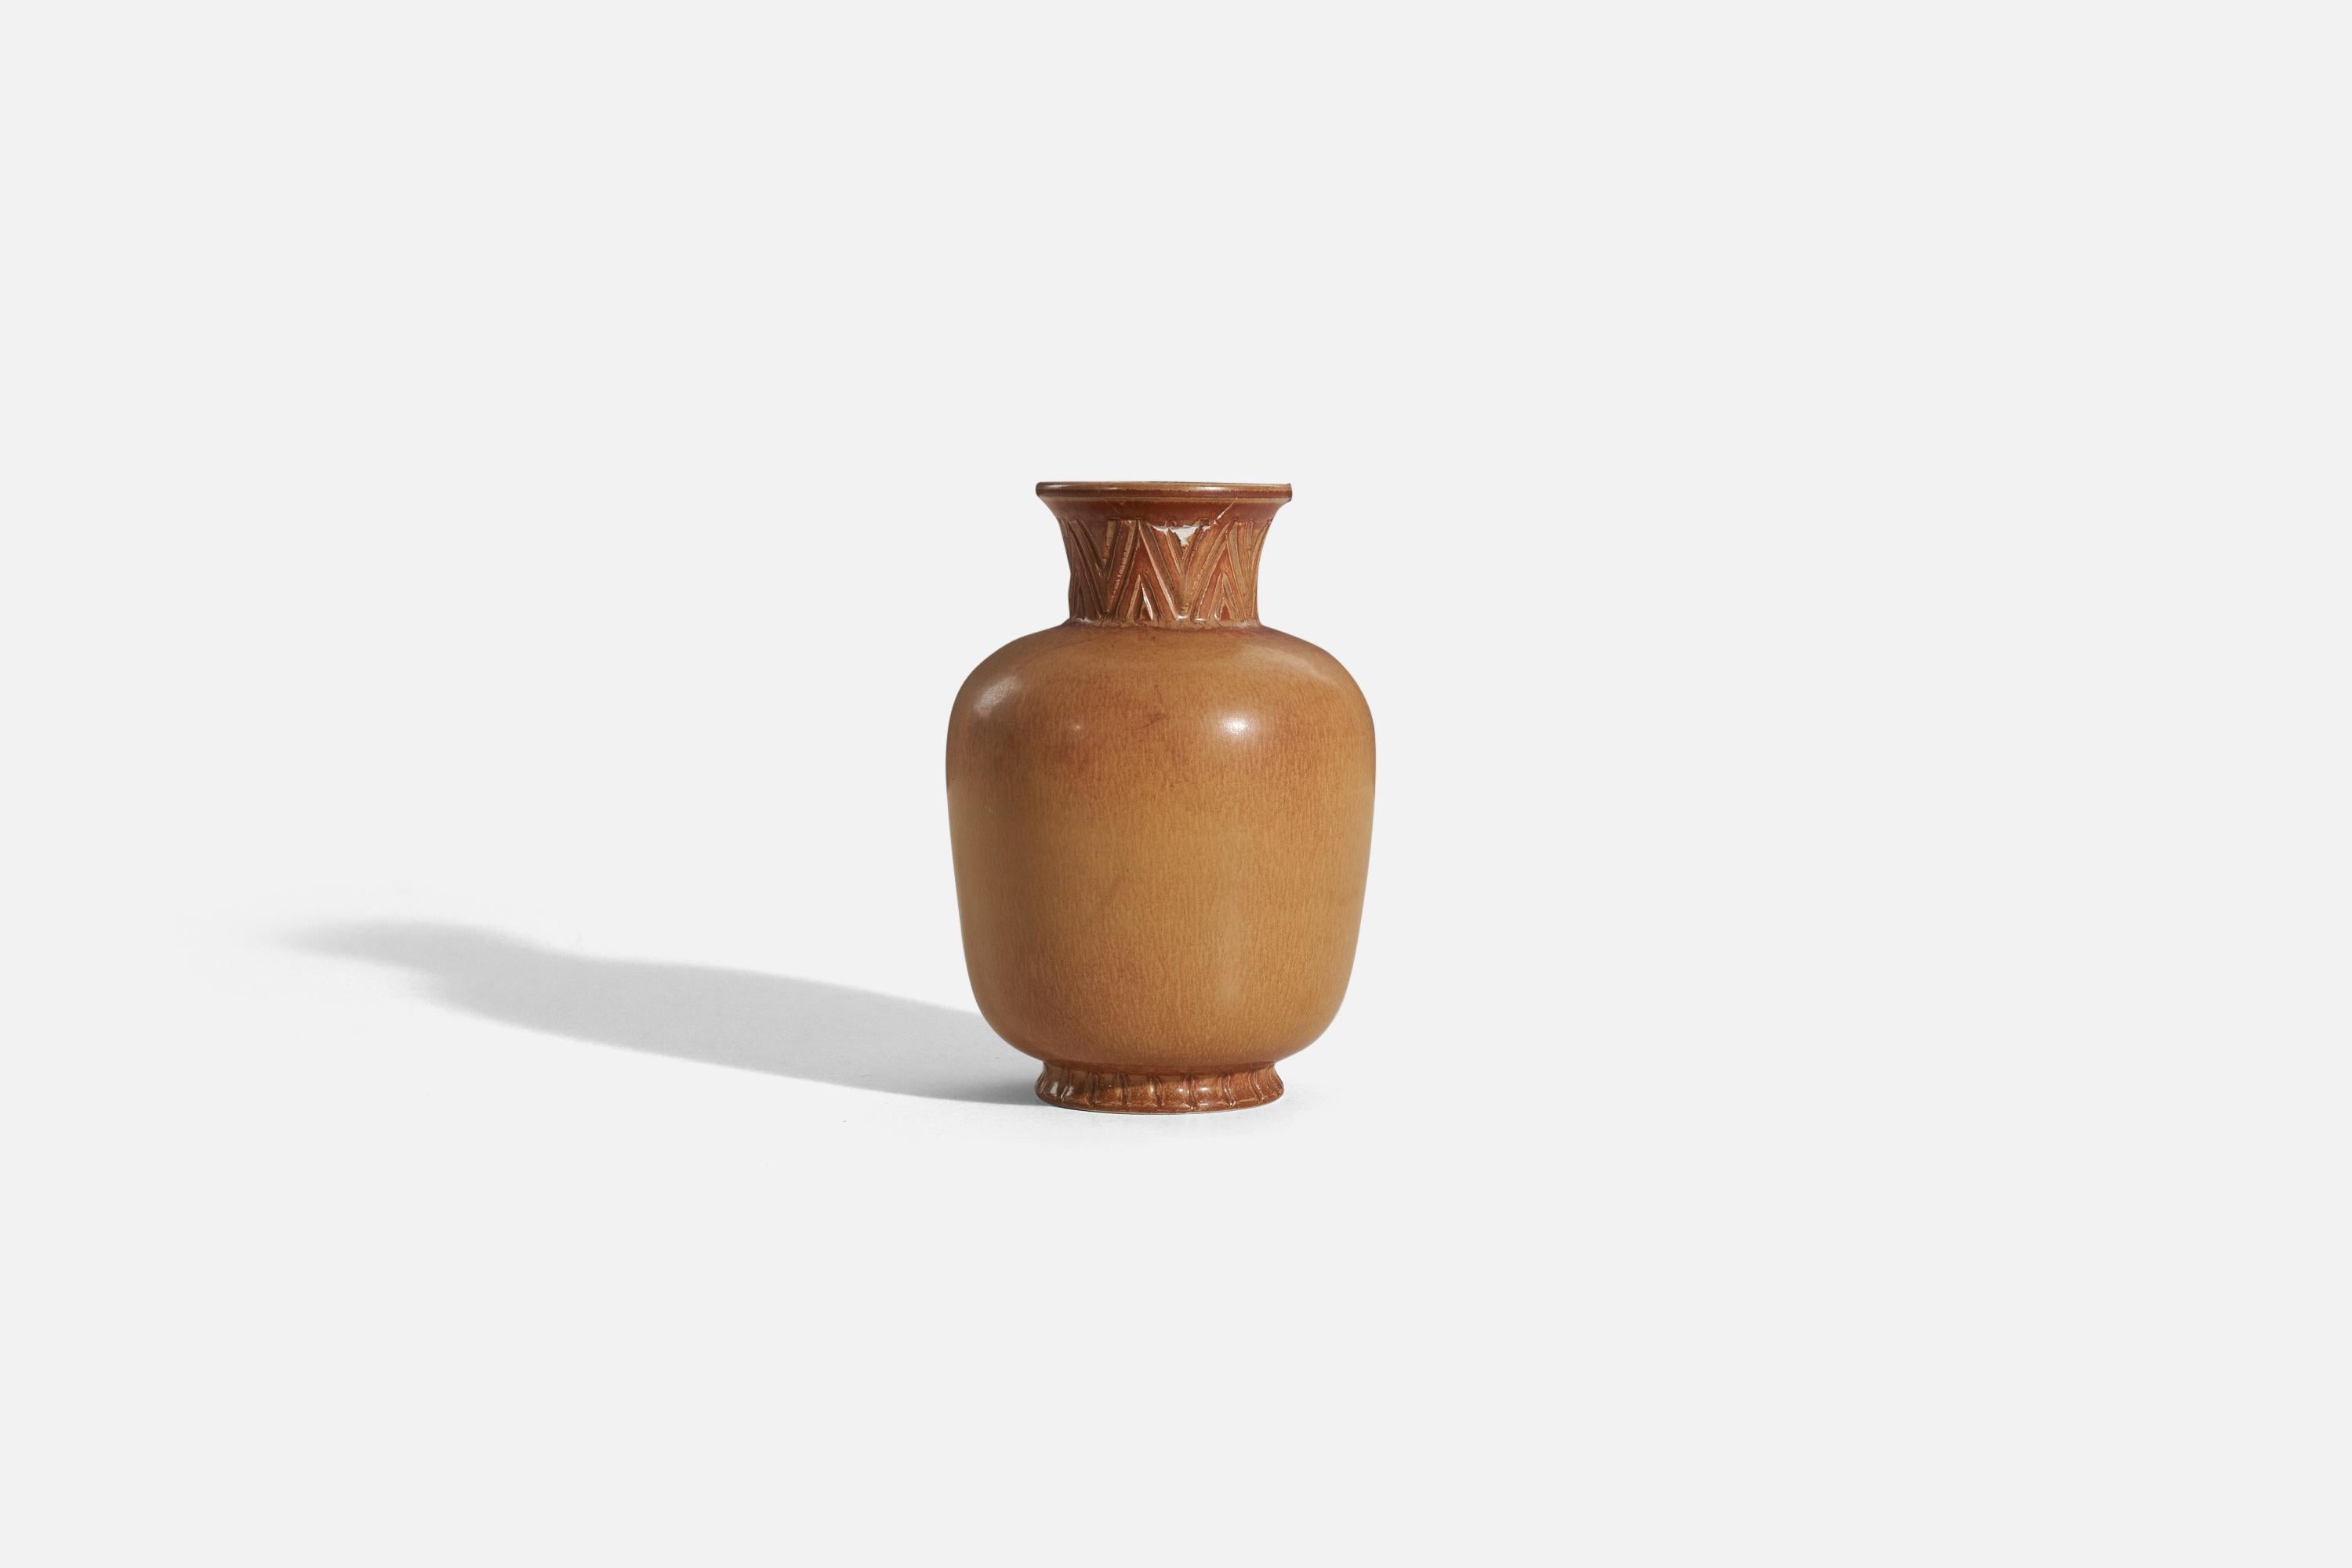 A brown, glazed vase designed by Gunnar Nylund and produced by Rörstrands, Sweden, 1950s.